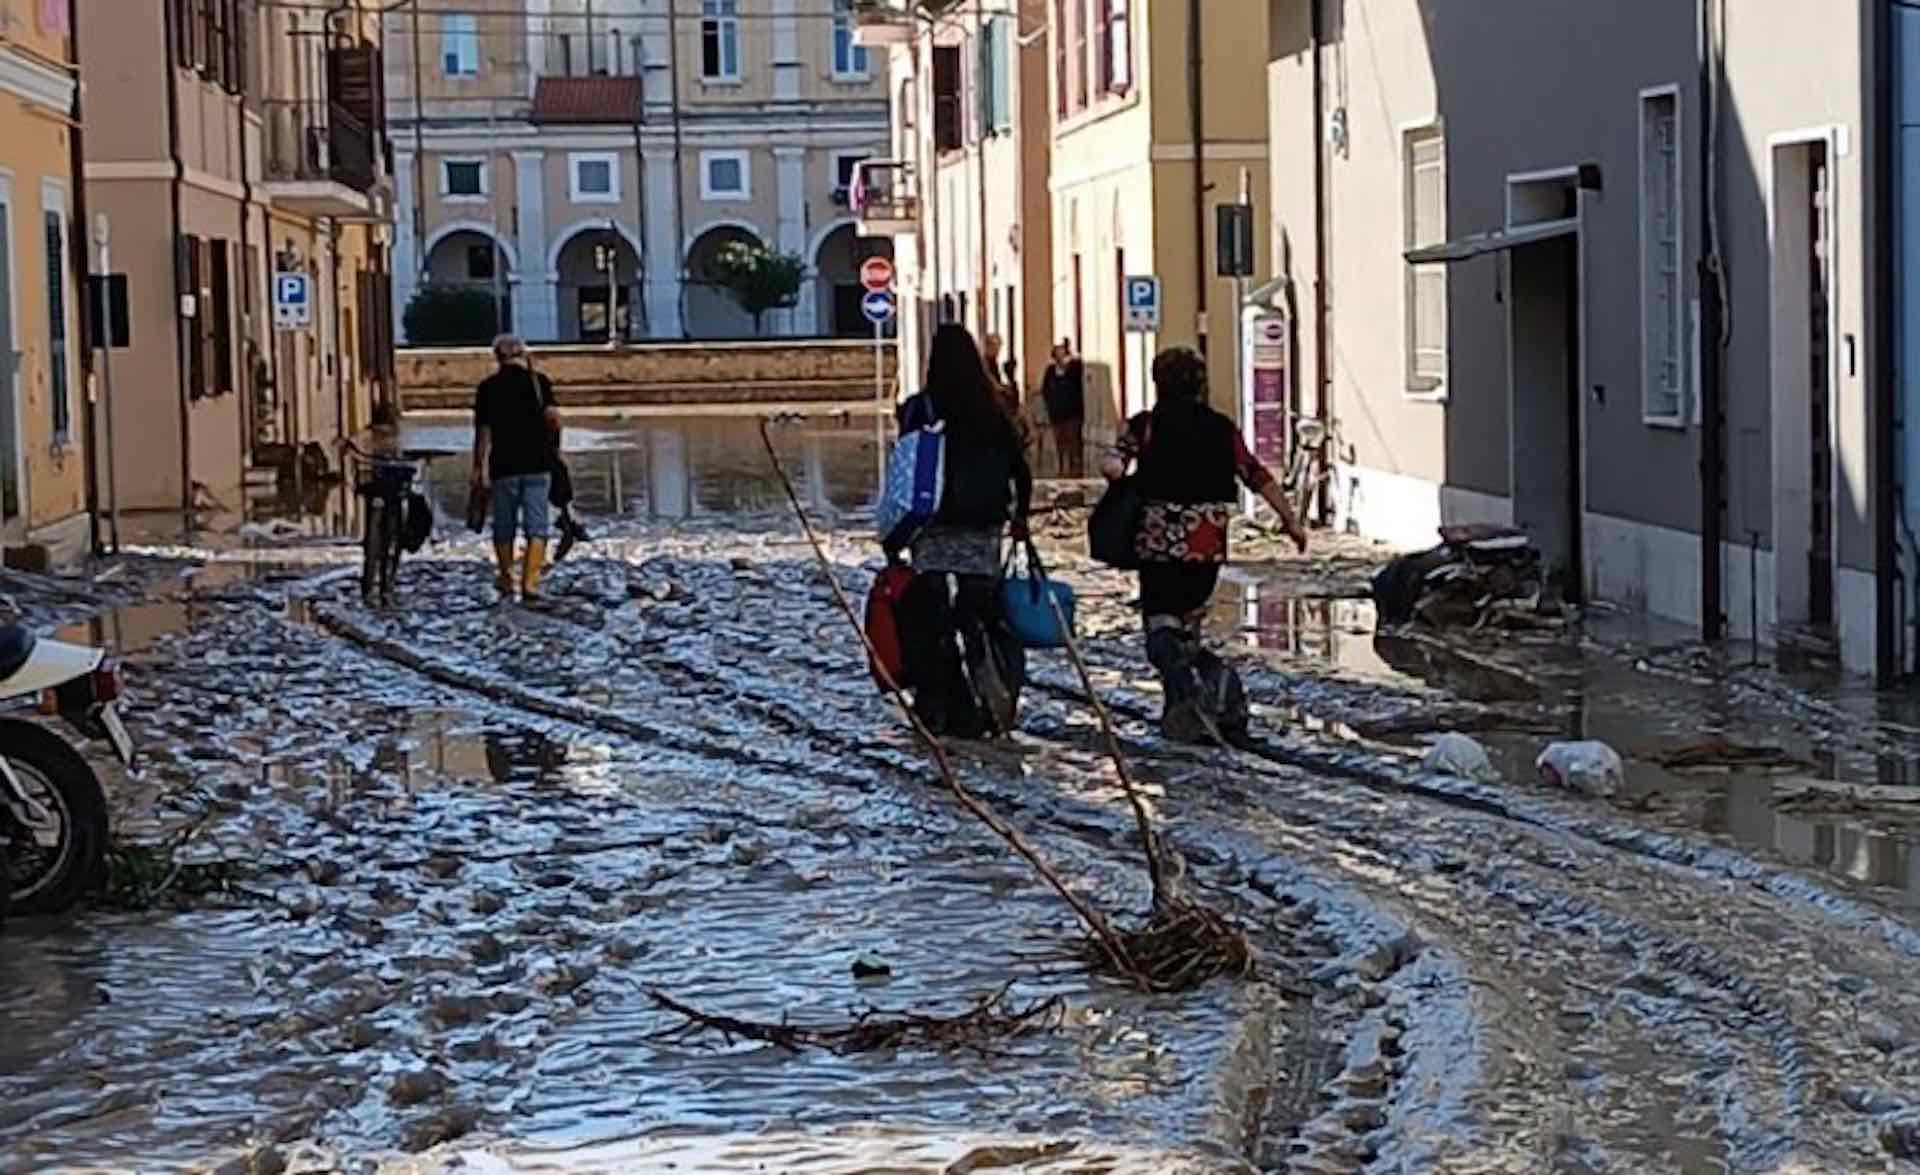 Flood in Italy kills 10 people as survivors are plucked from rooftops and trees